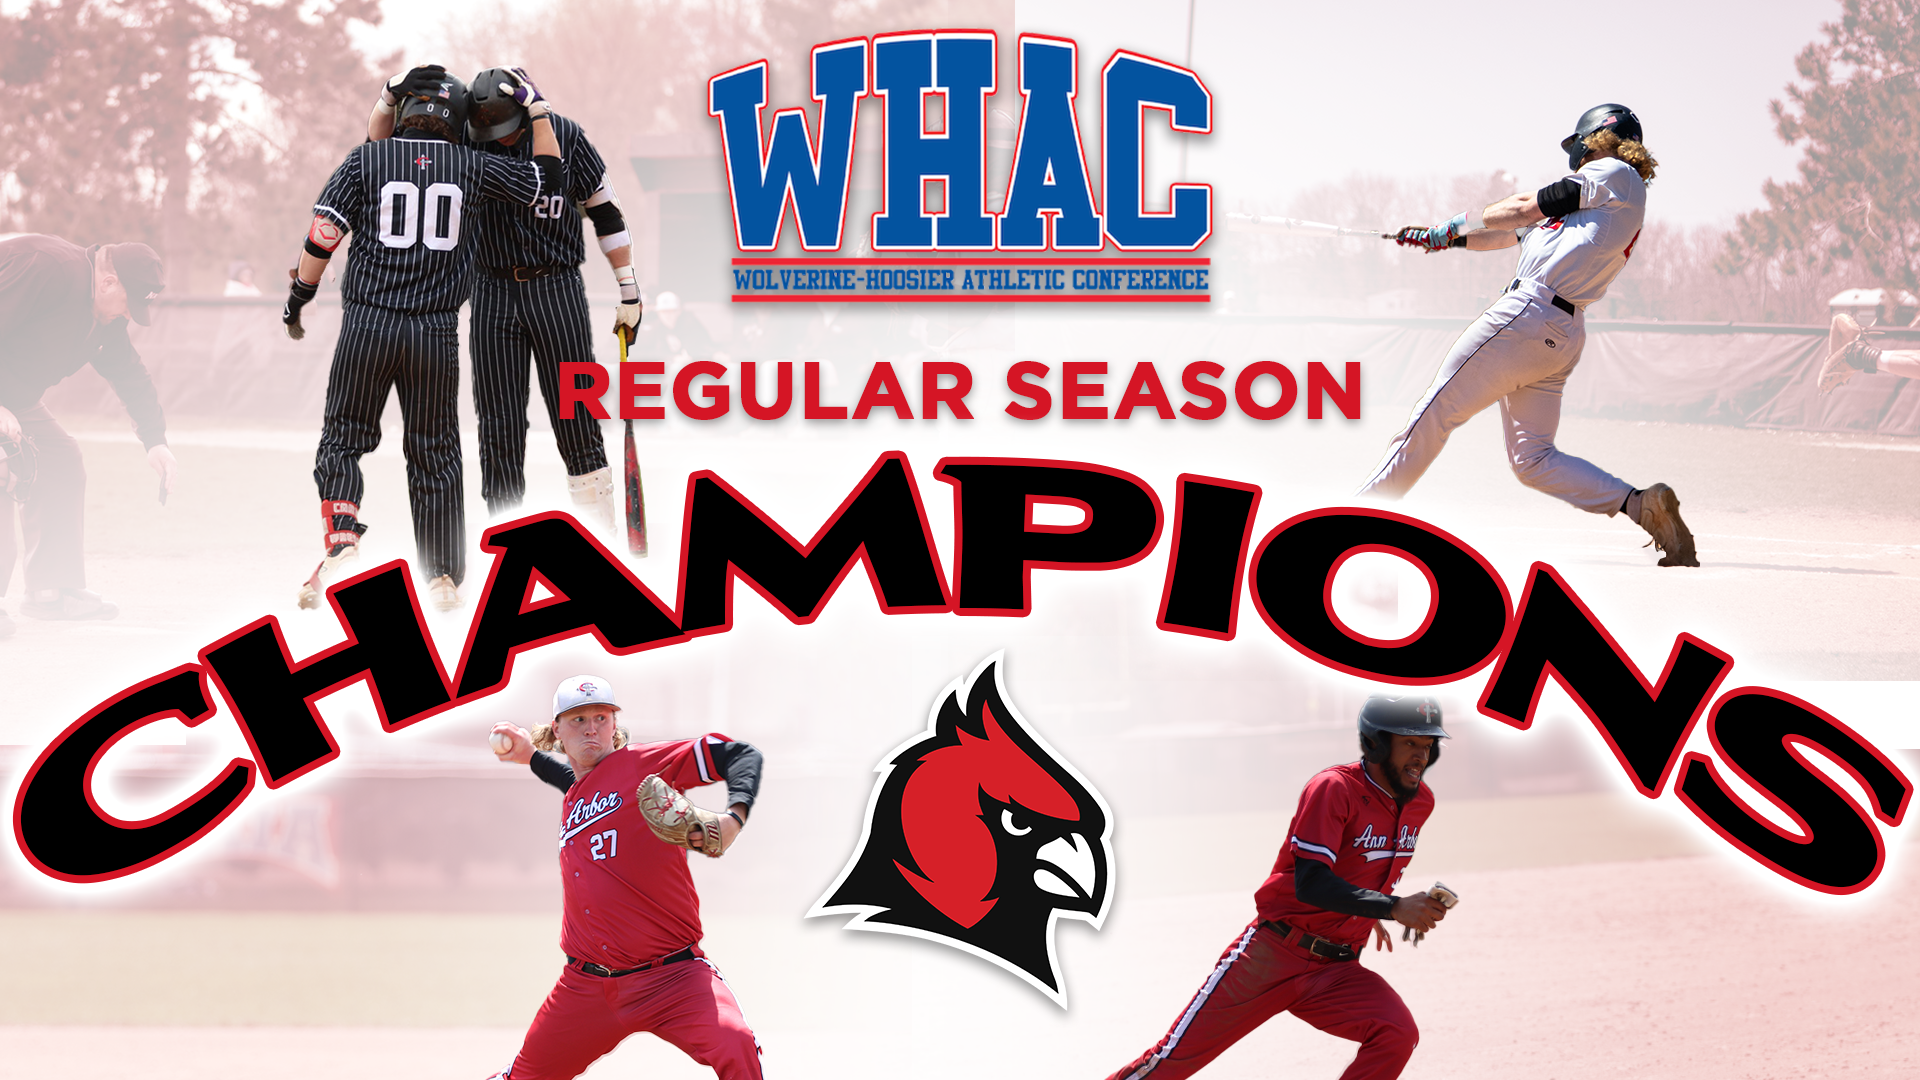 Baseball clinches WHAC Regular Season title with wins over Lawrence Tech